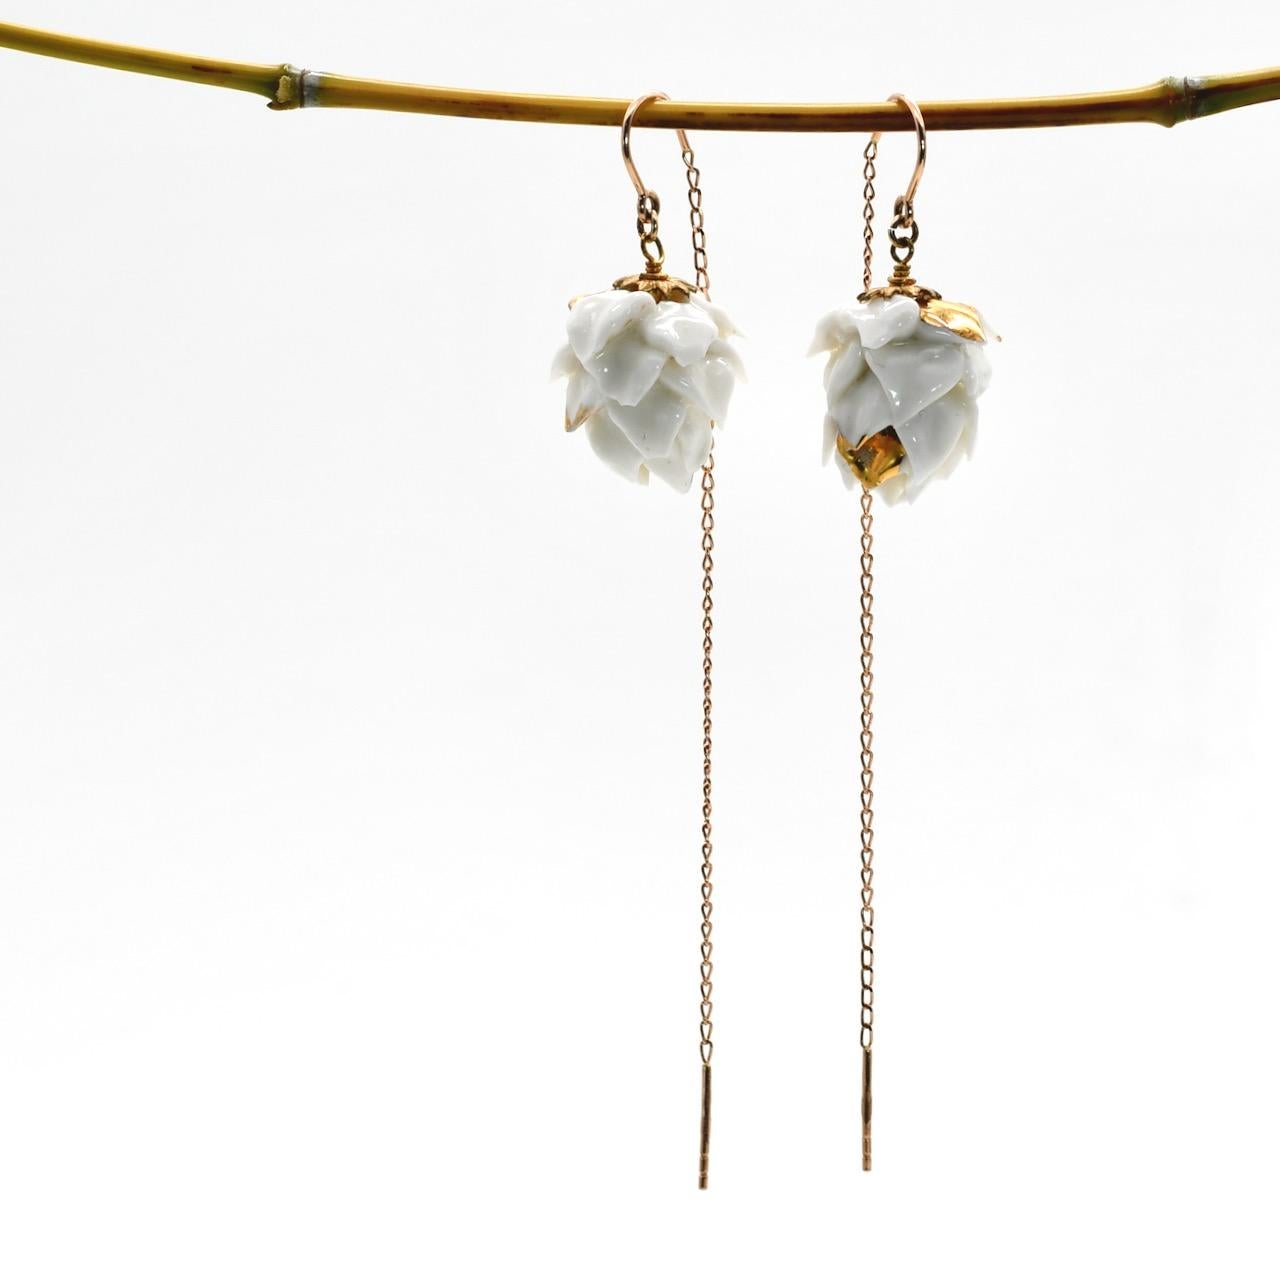 Porcelain  18K gold threaders  24K gold embellishment  Handmade in London

These solid gold pull-through porcelain artichokes earrings are truly one-of-a-kind. The combination of porcelain and solid gold is unbeatable and surely rare find. Intricate